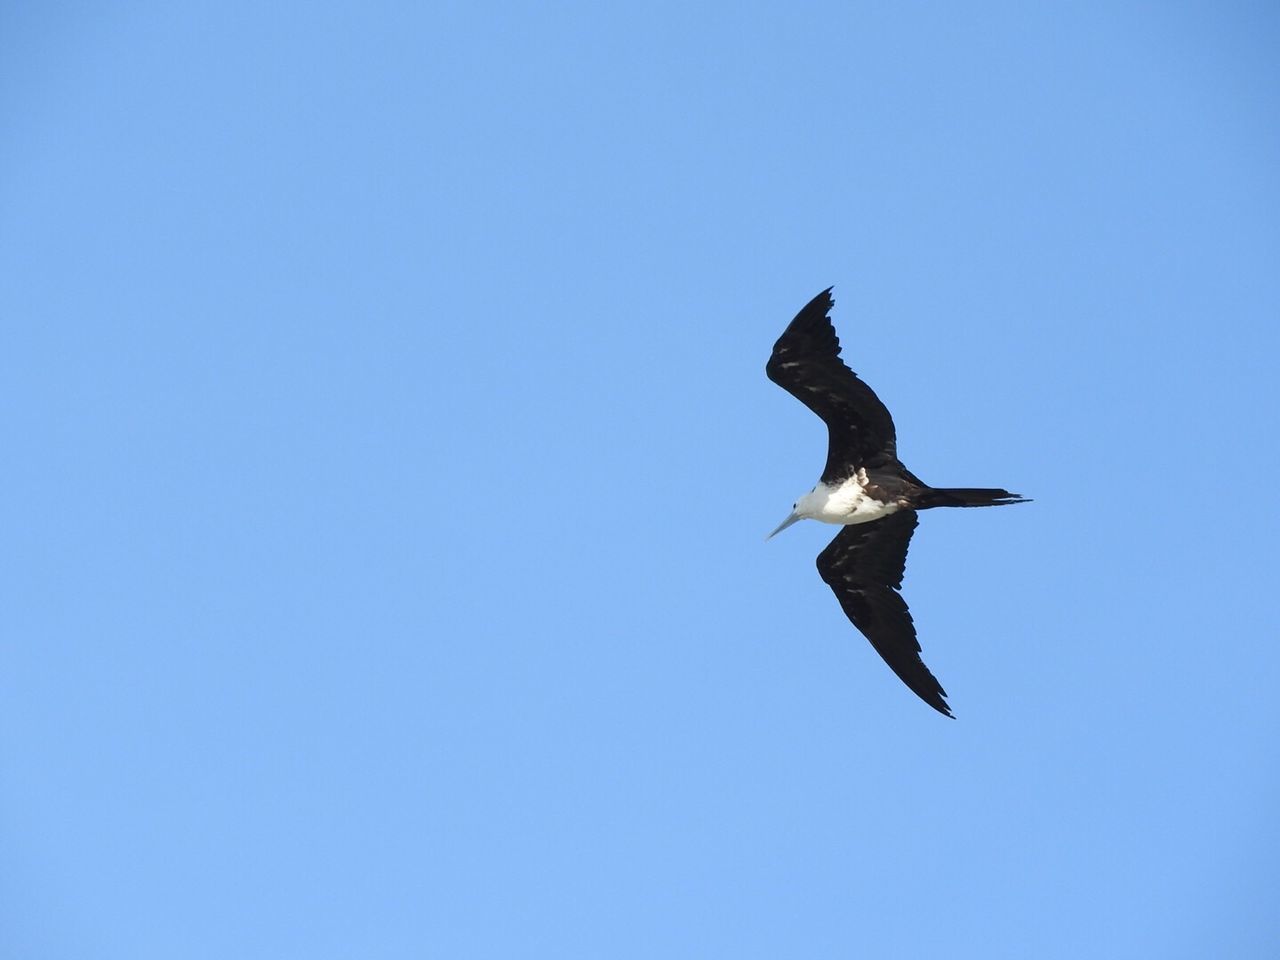 Low angle view of bird flying in clear blue sky